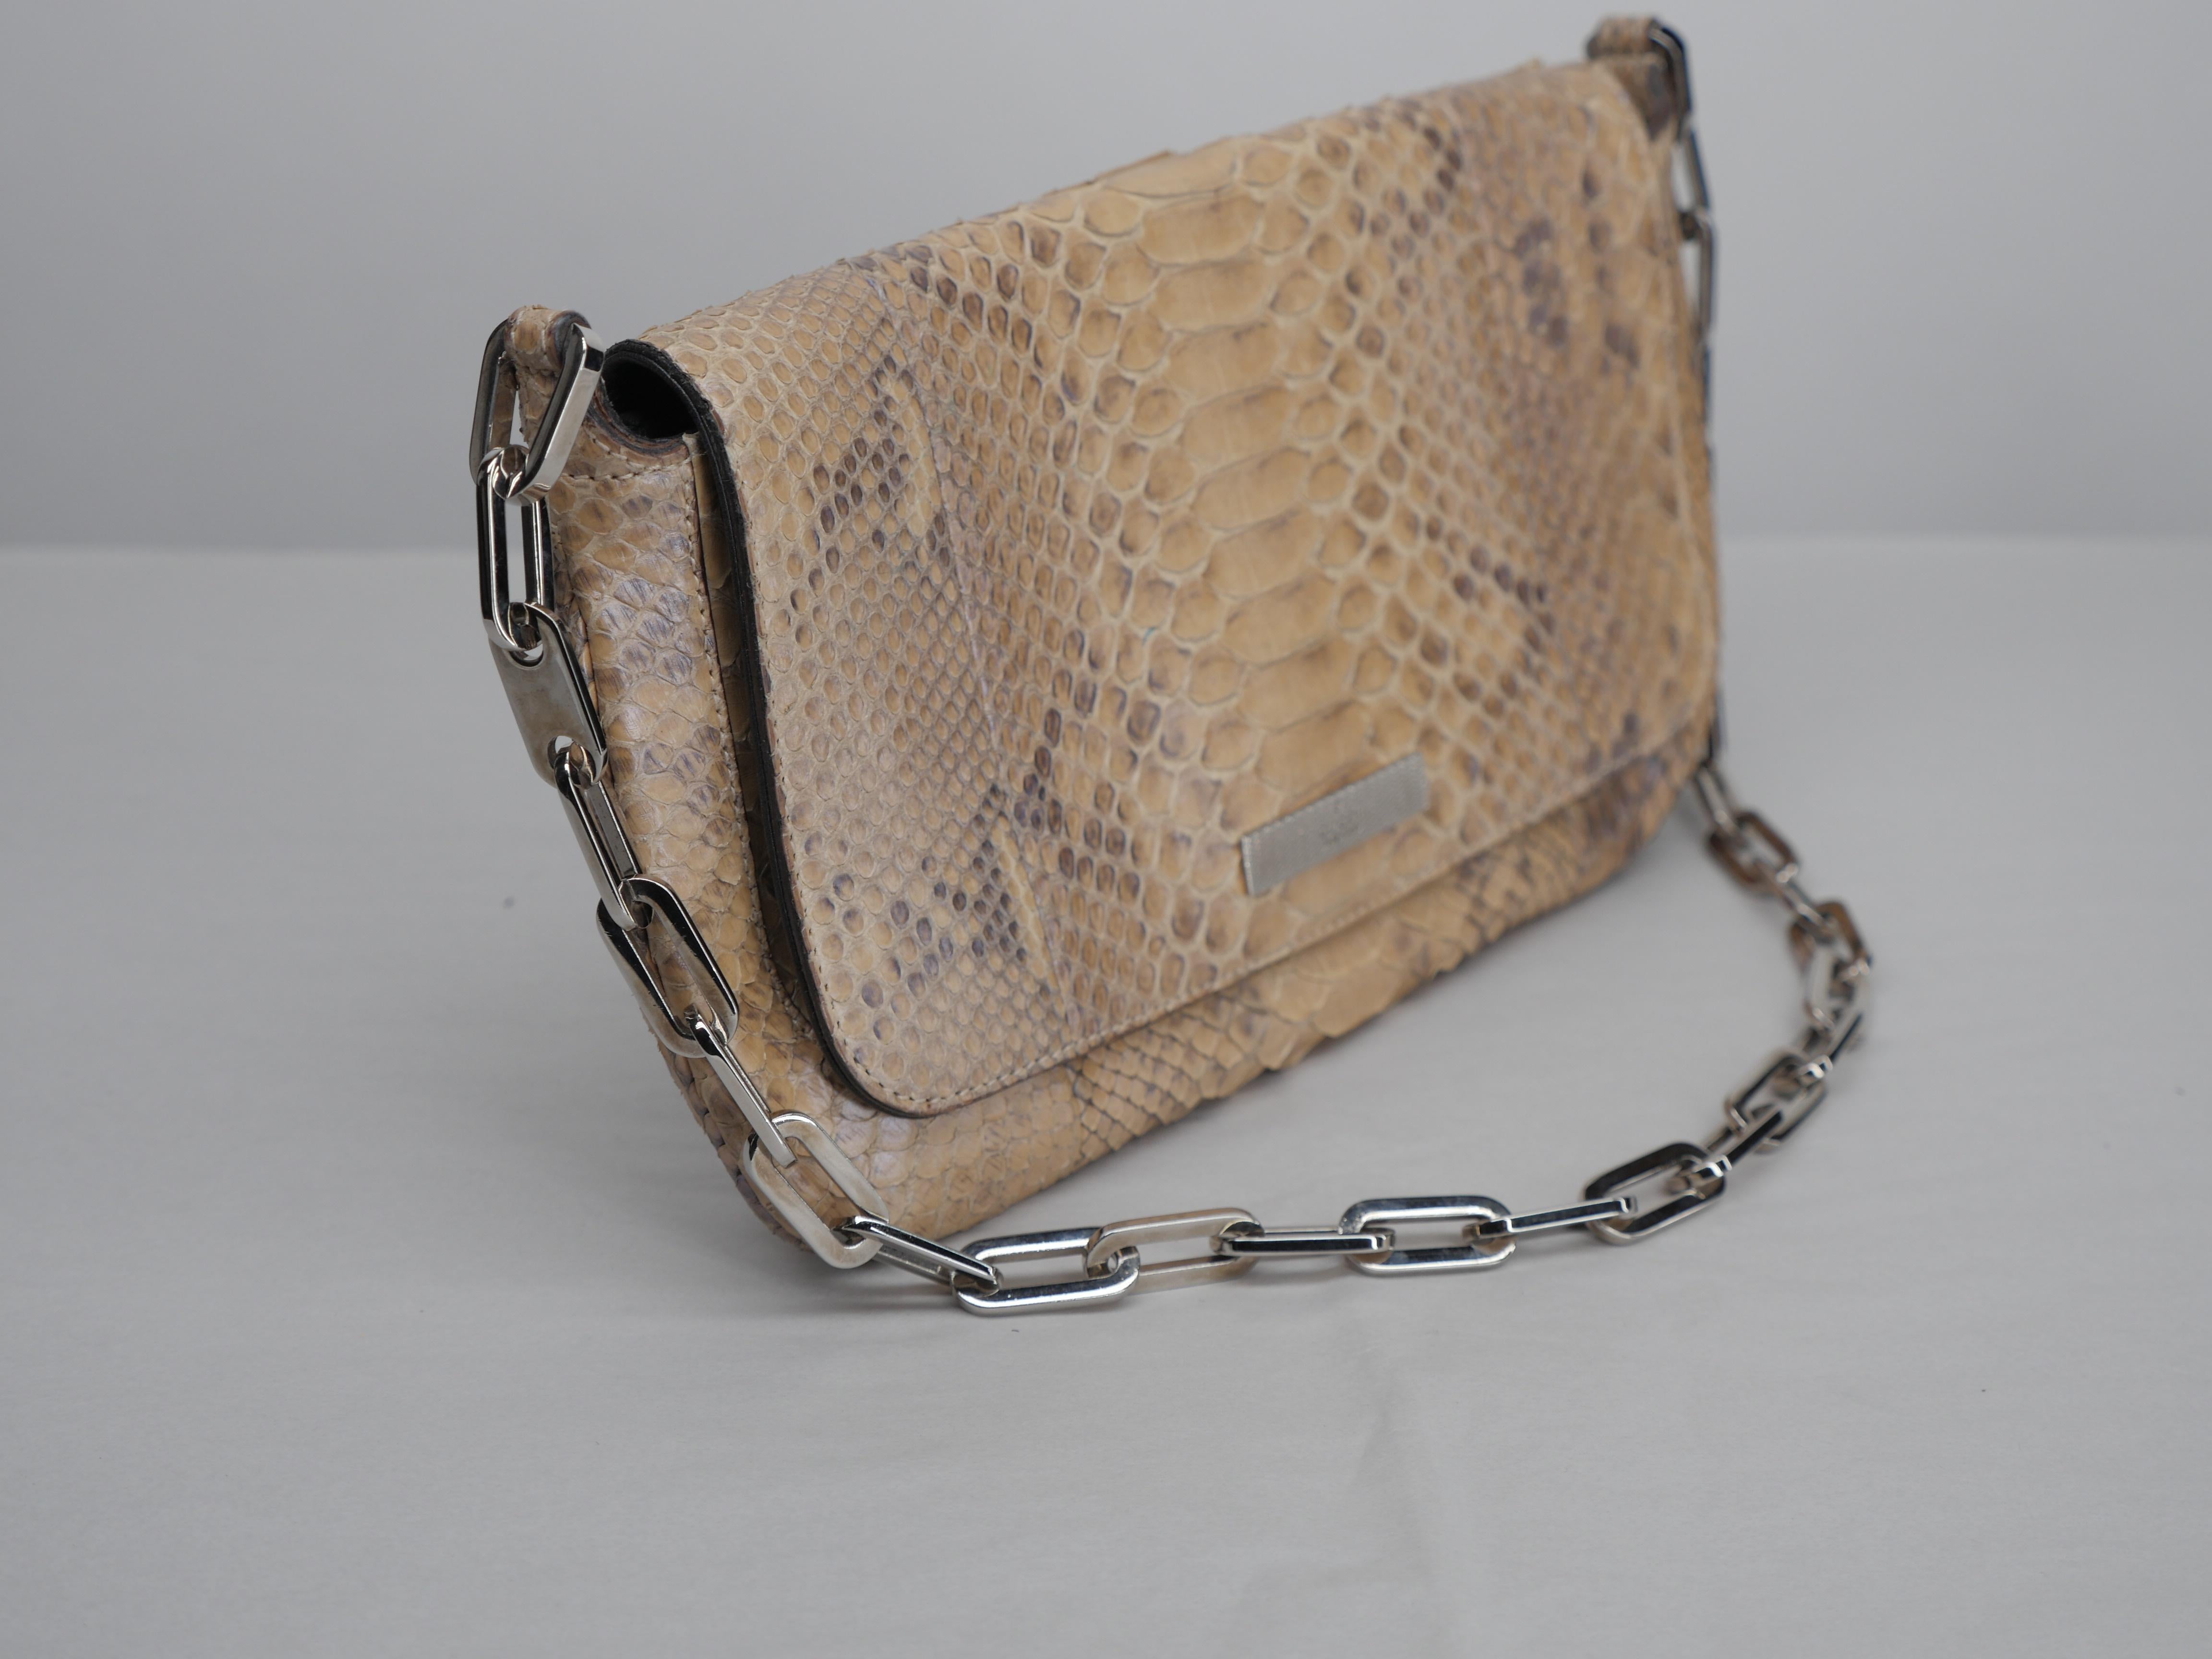 Women's or Men's Gucci Tan Small Python Flap Shoulder Bag with Chain Link Strap